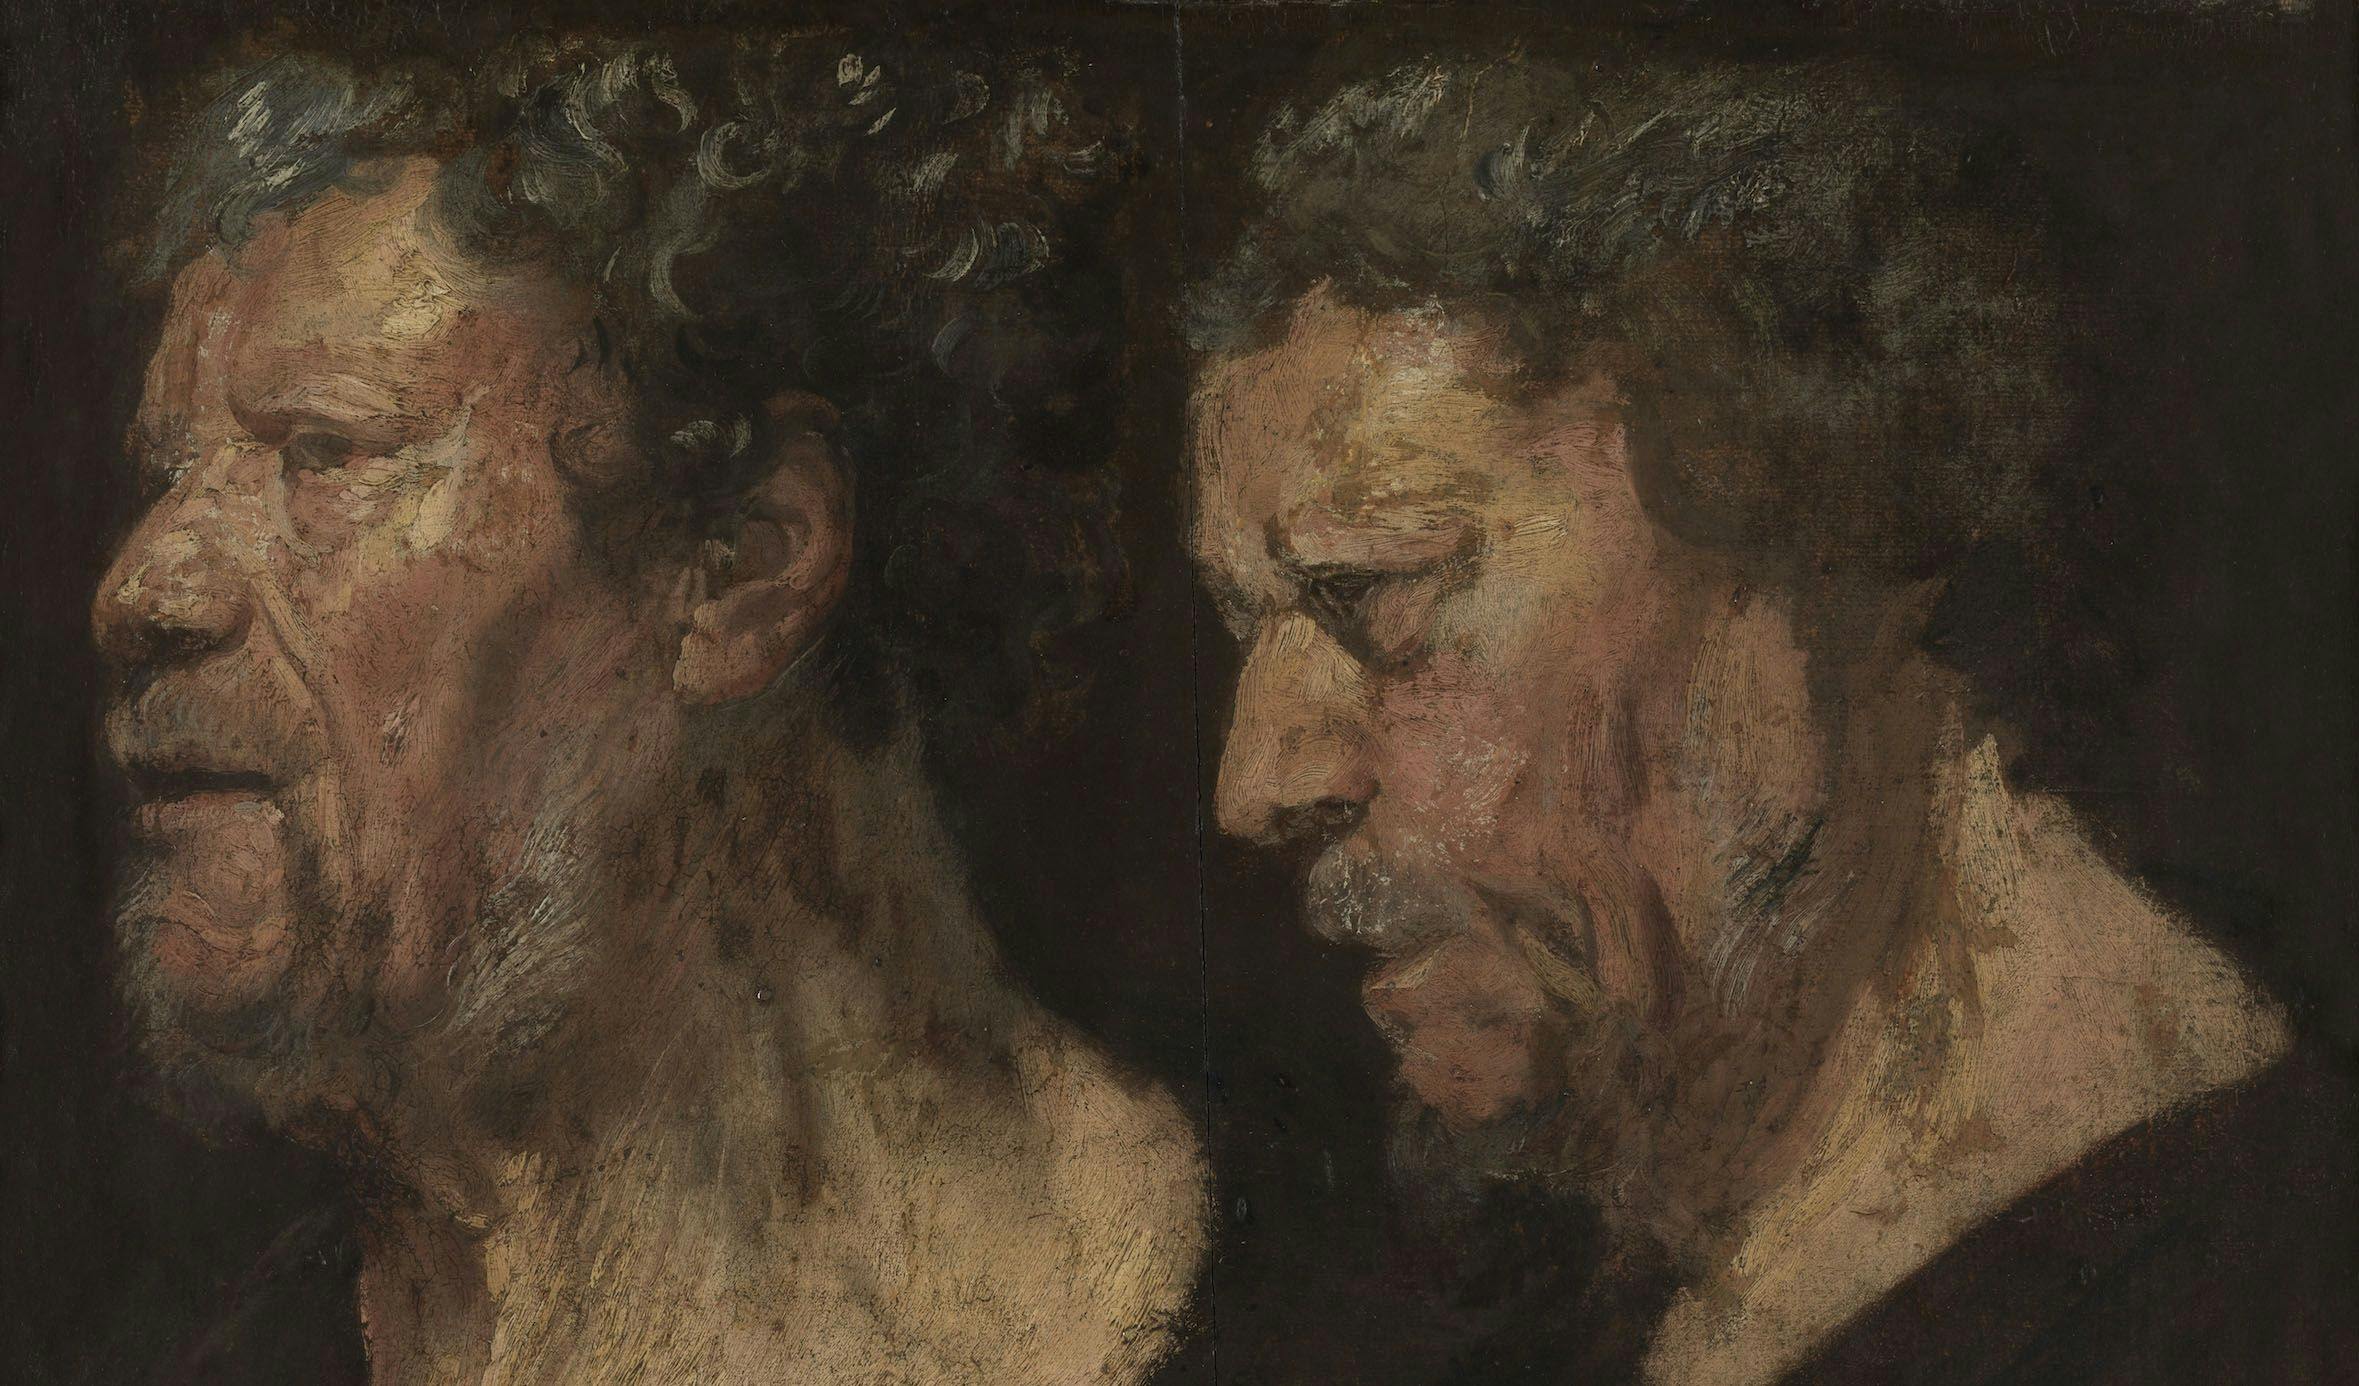 A detail of a painting by Jacob Jordaens titled Studies of the Head of Abraham Grapheus, dated 1621.